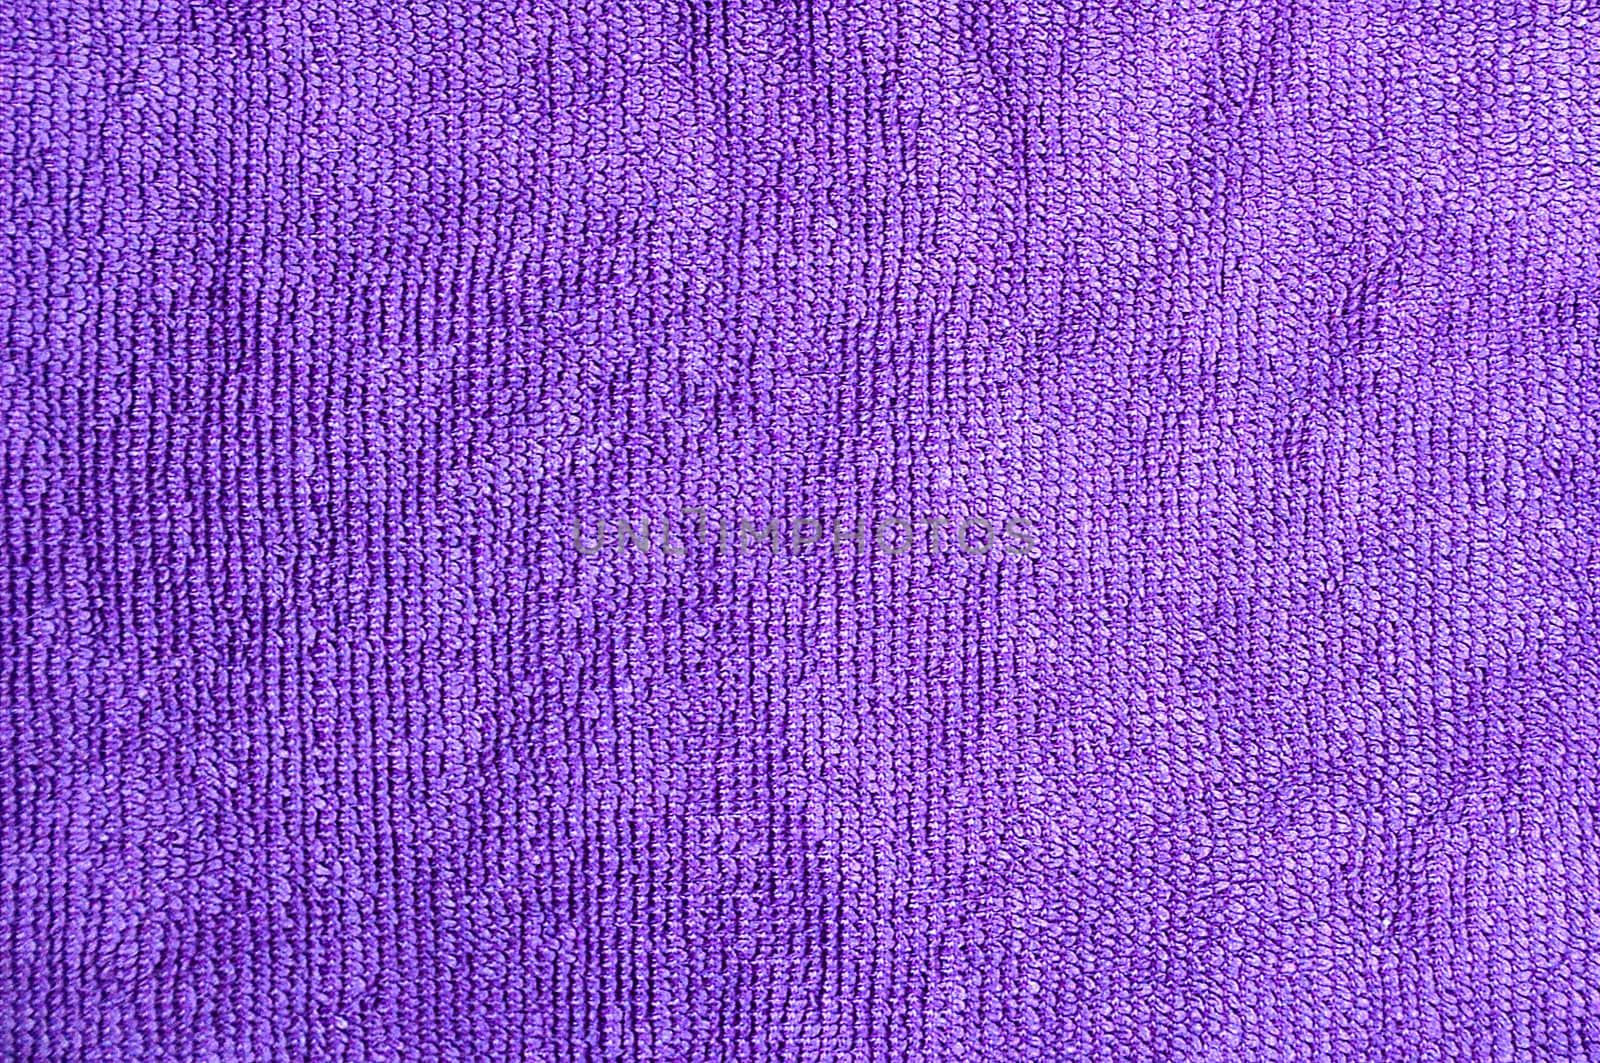 lilac towel texture, vibrant colors and strong shading expanse